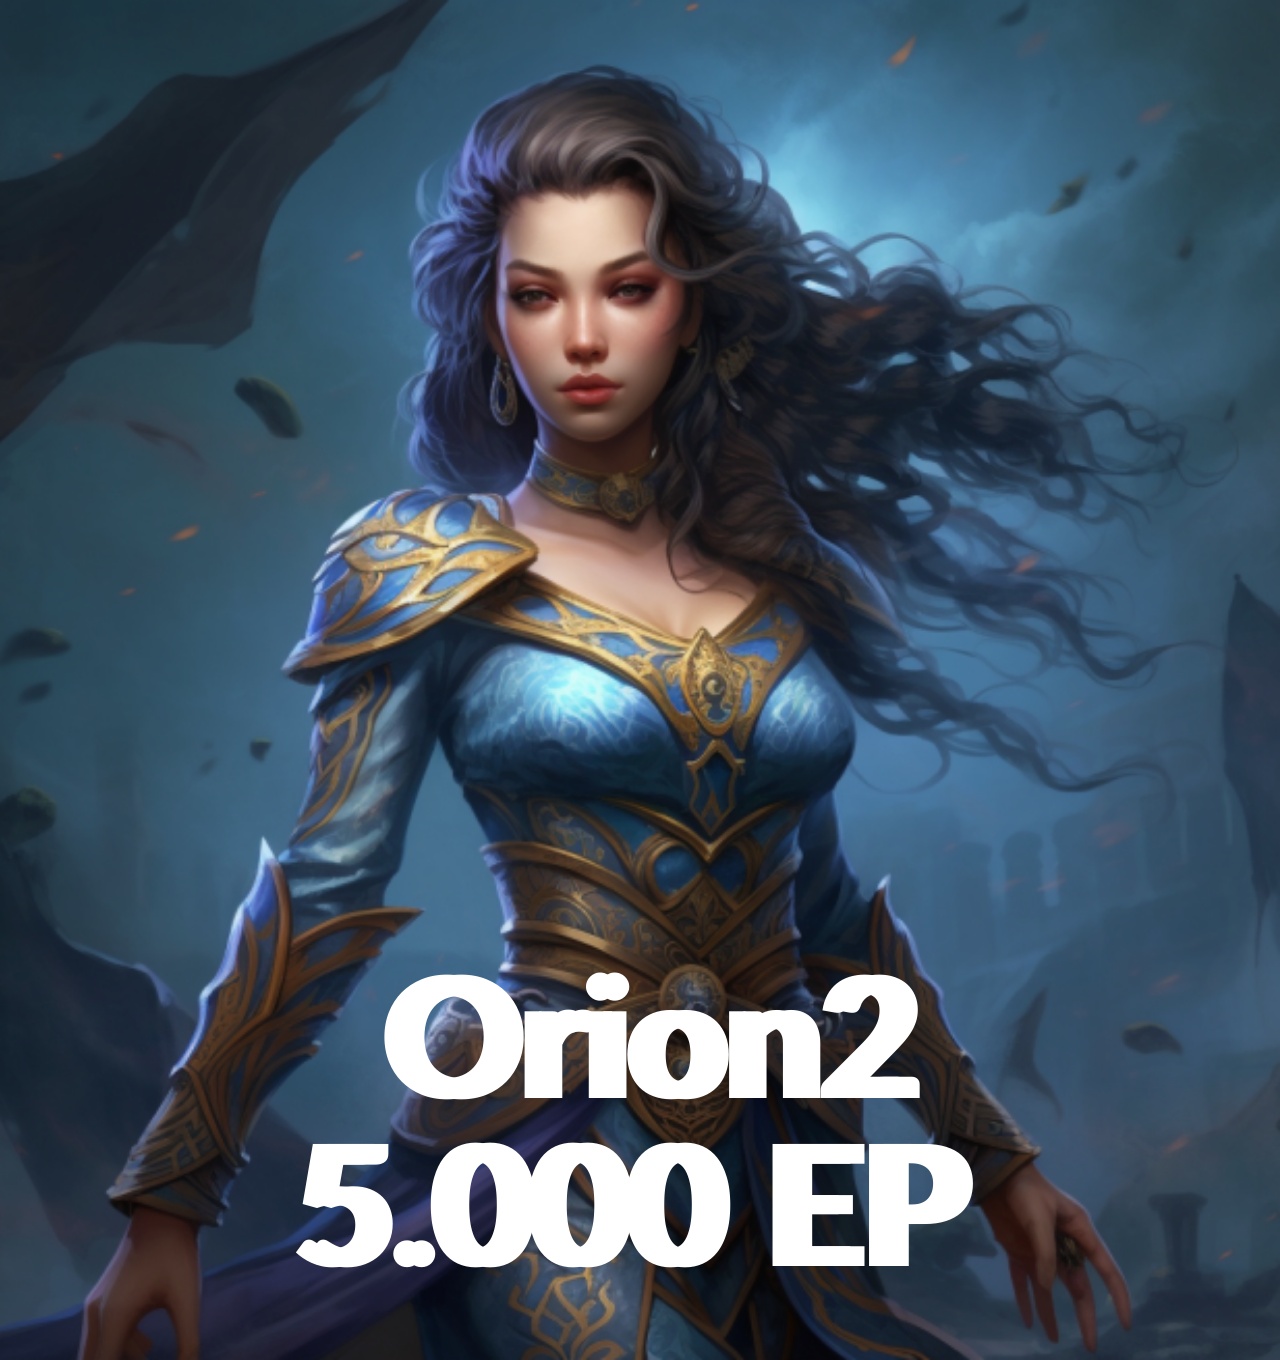 Orion2 5.000 EP